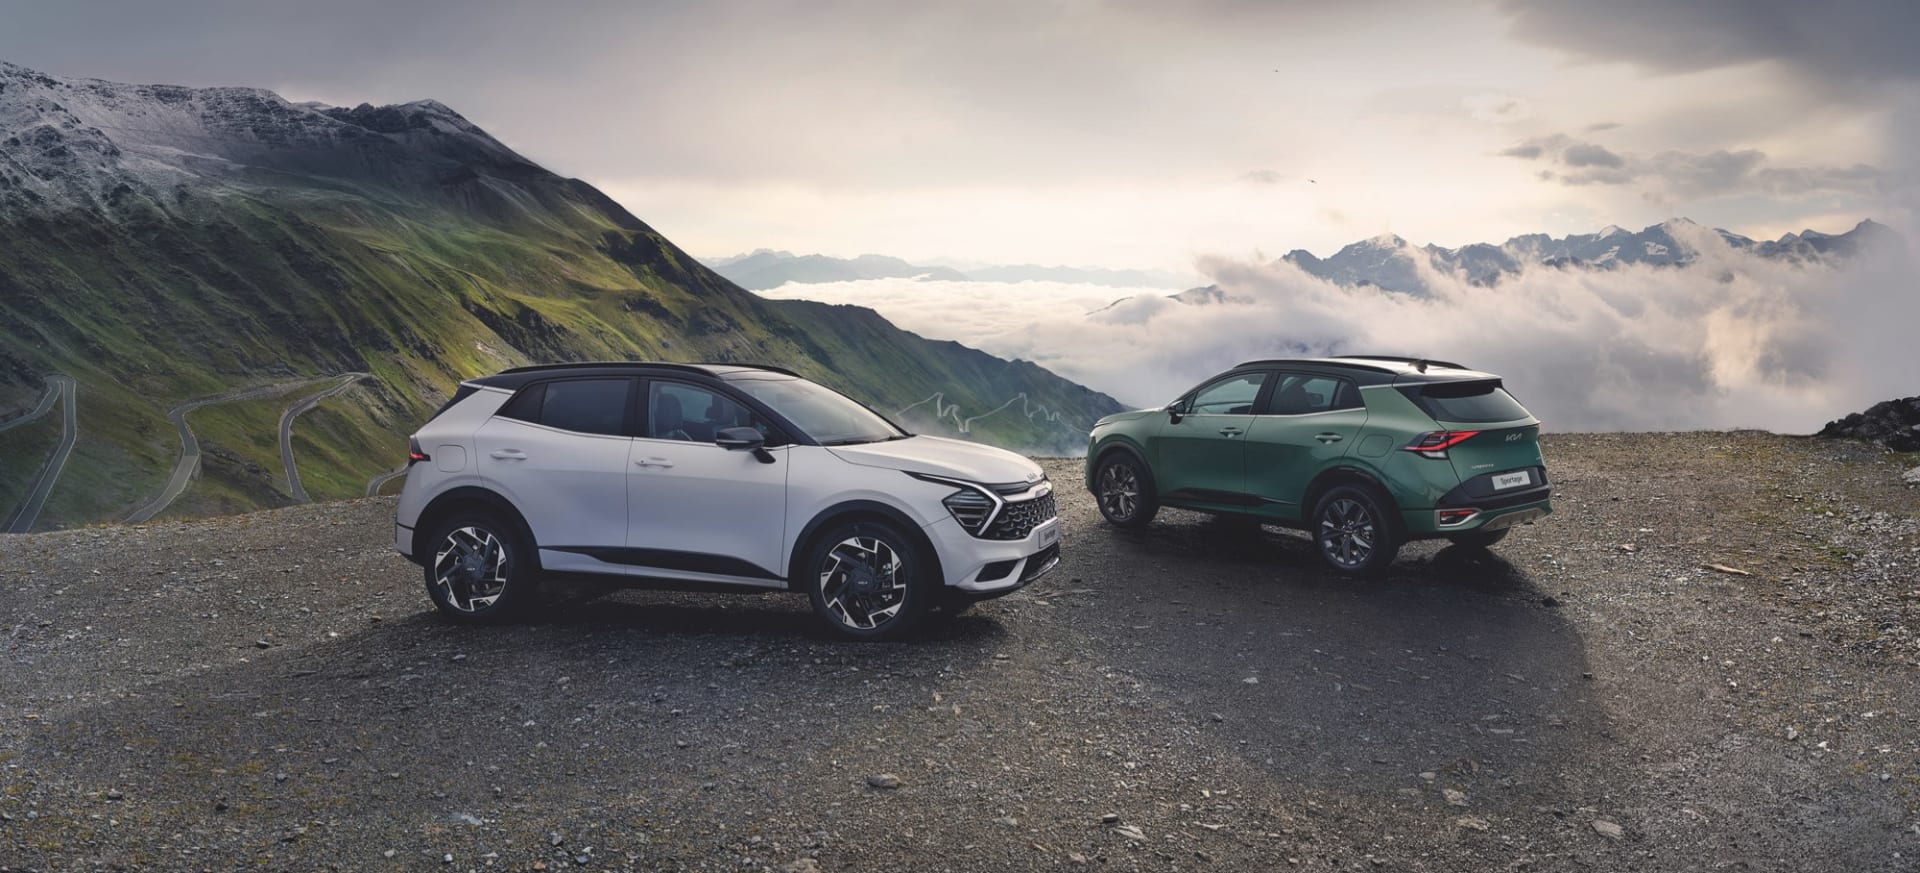 All-new Sportage